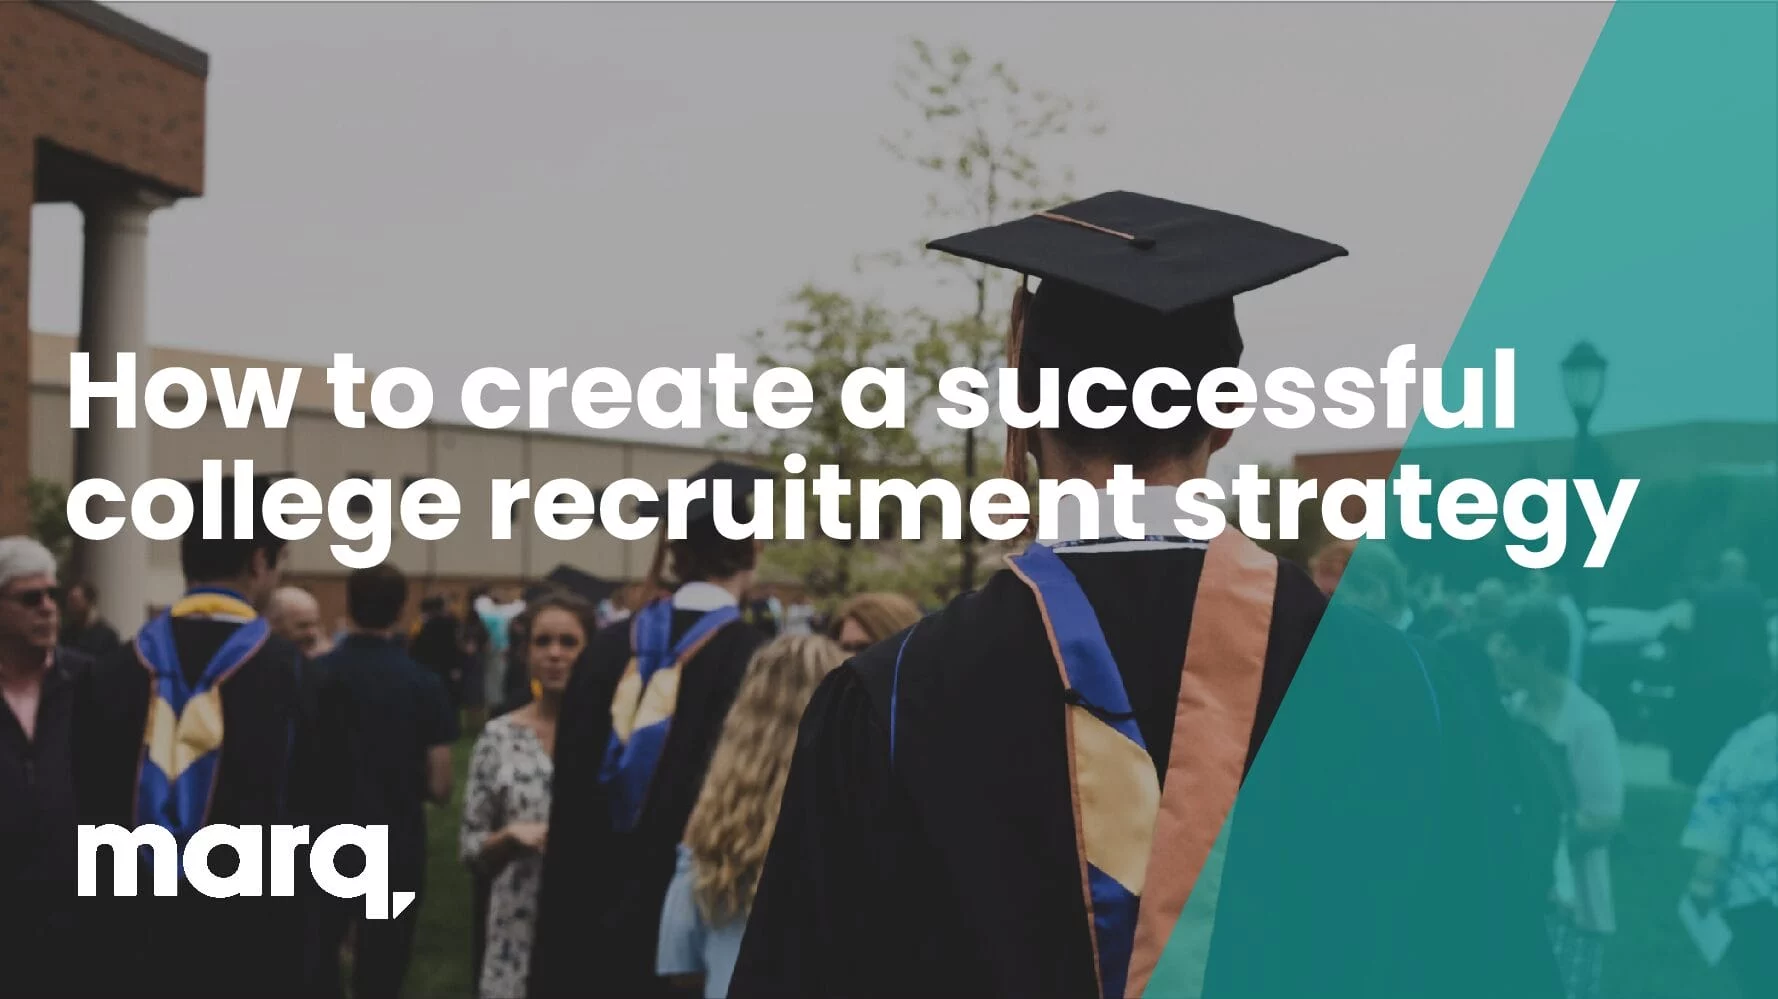 How to create a successful college recruitment strategy